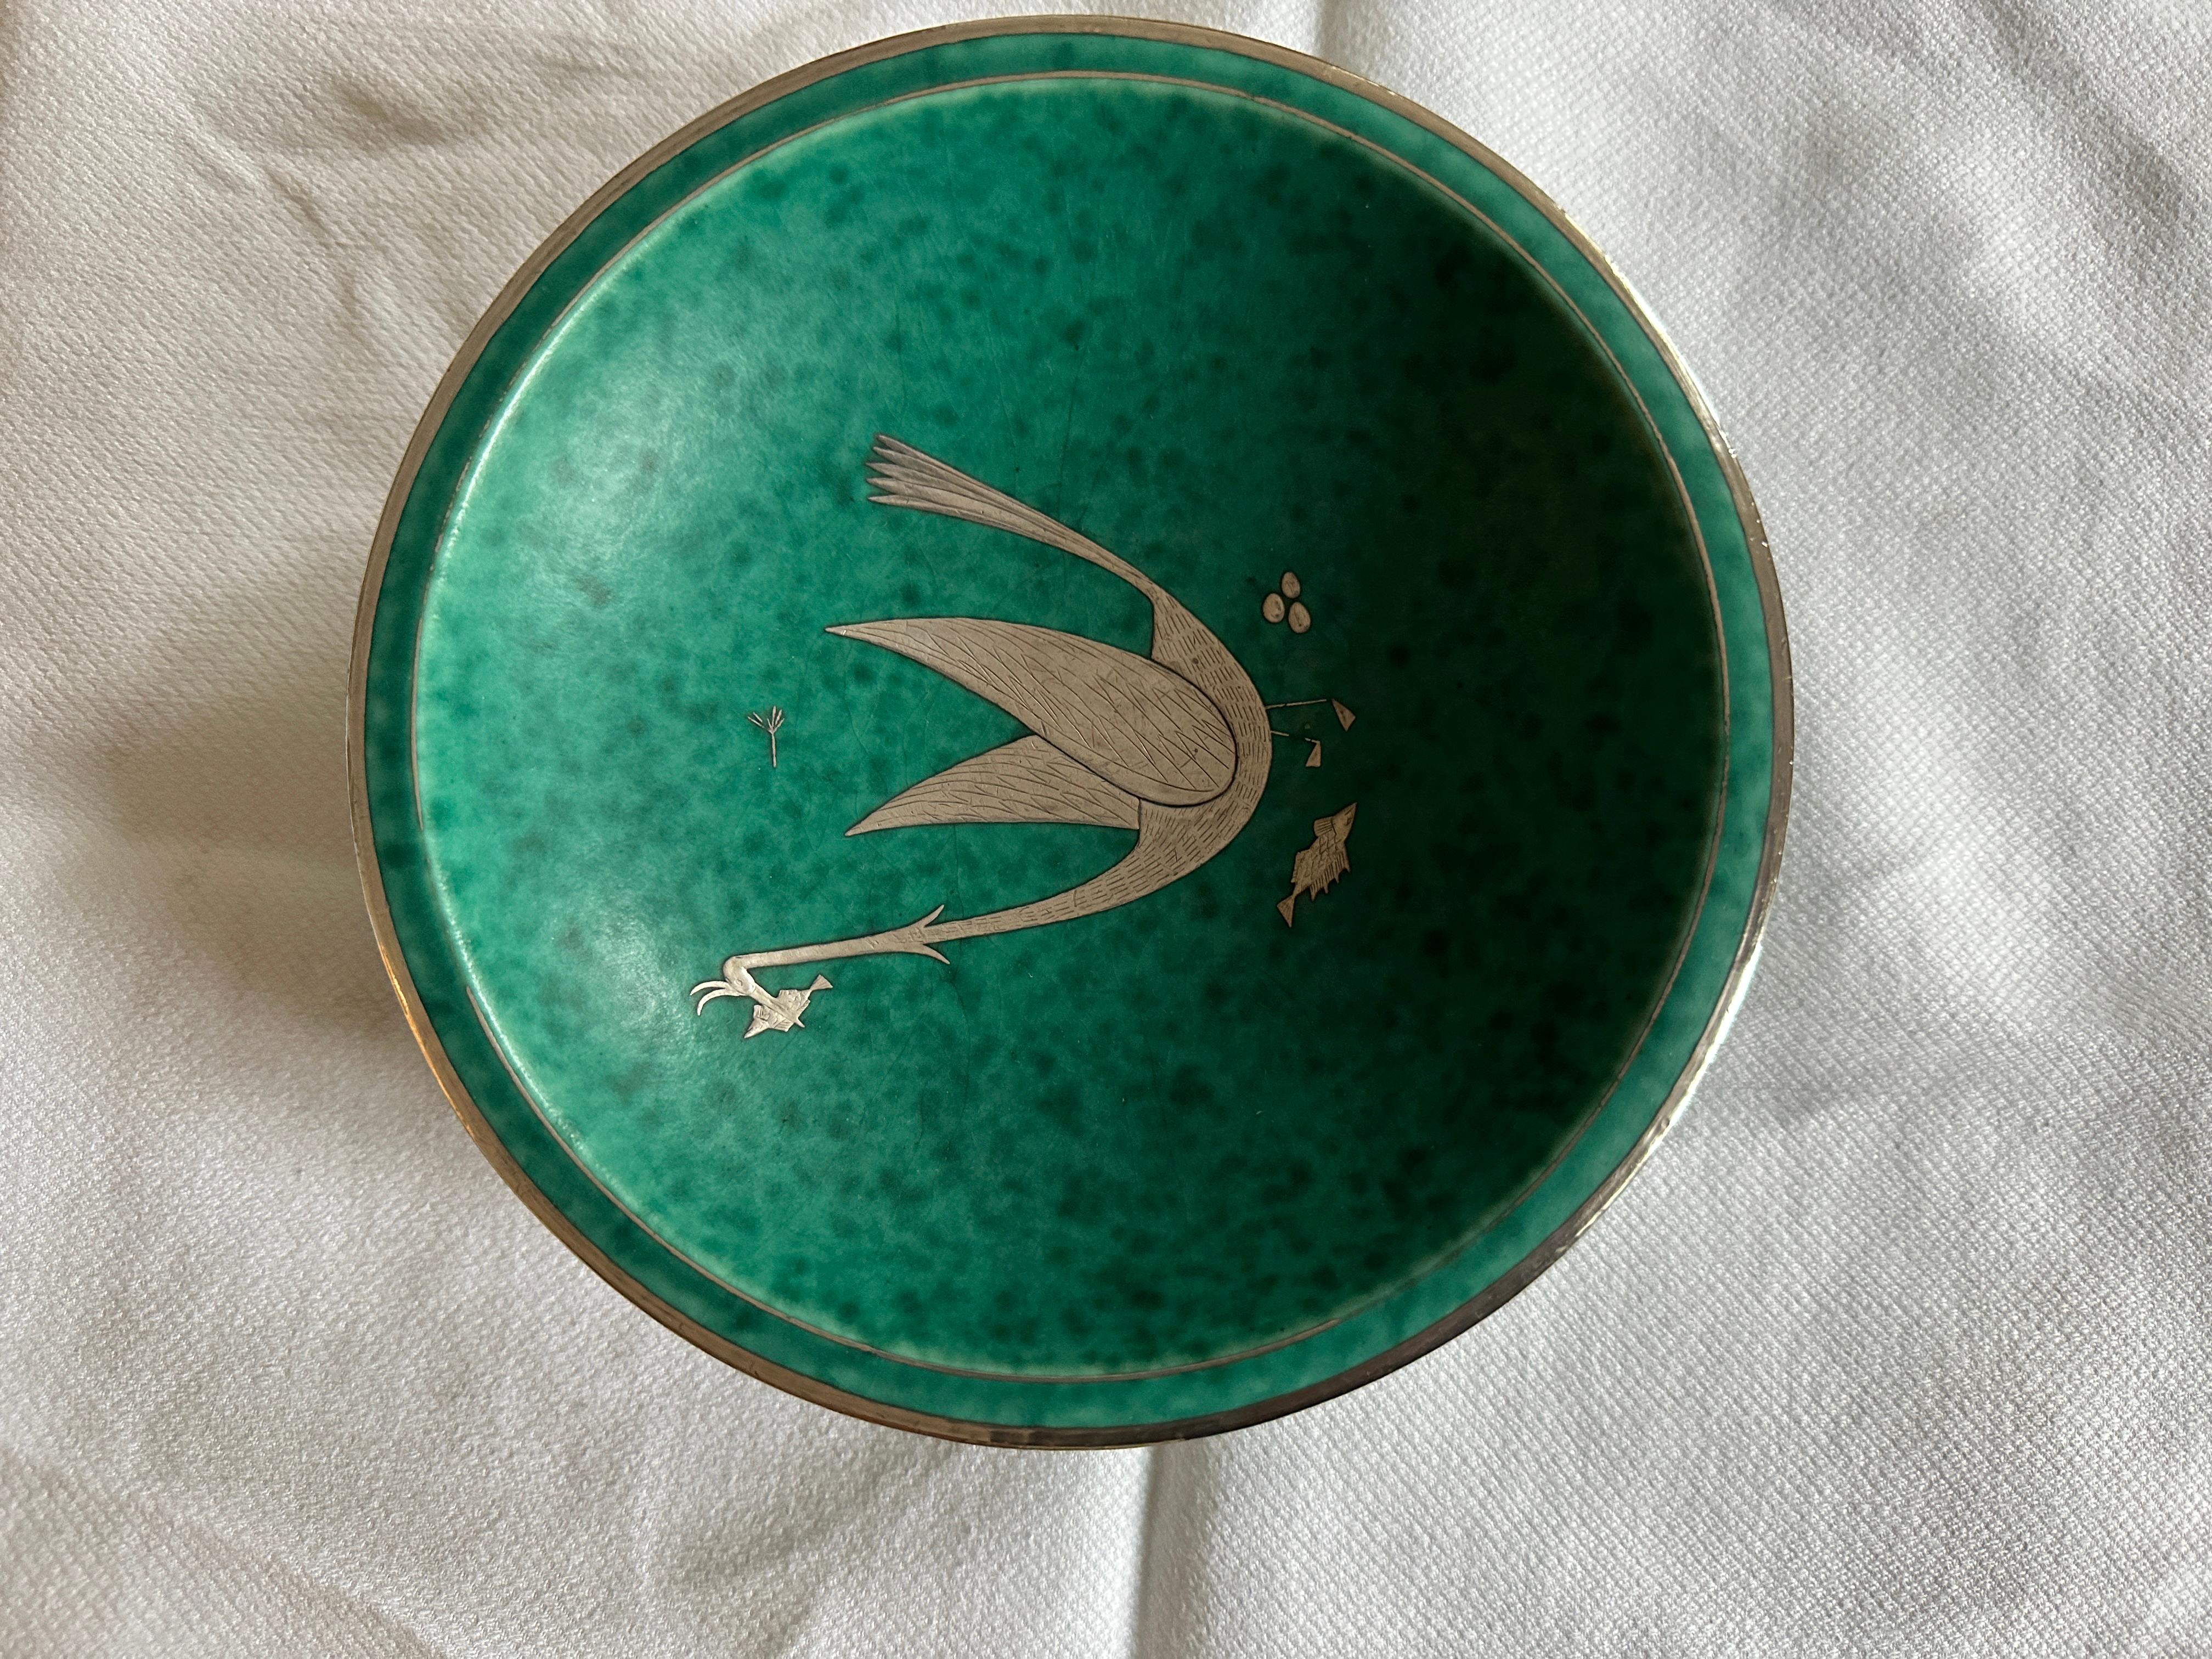 A bowl in ceramic with handmade silver inlay from the 1930s Argenta collection made by Wilhelm Kåge for Gustavsberg, signature underneath.
 The now iconic argenta stoneware collection, with its green glaze and silver decoration, is one of Wilhelm